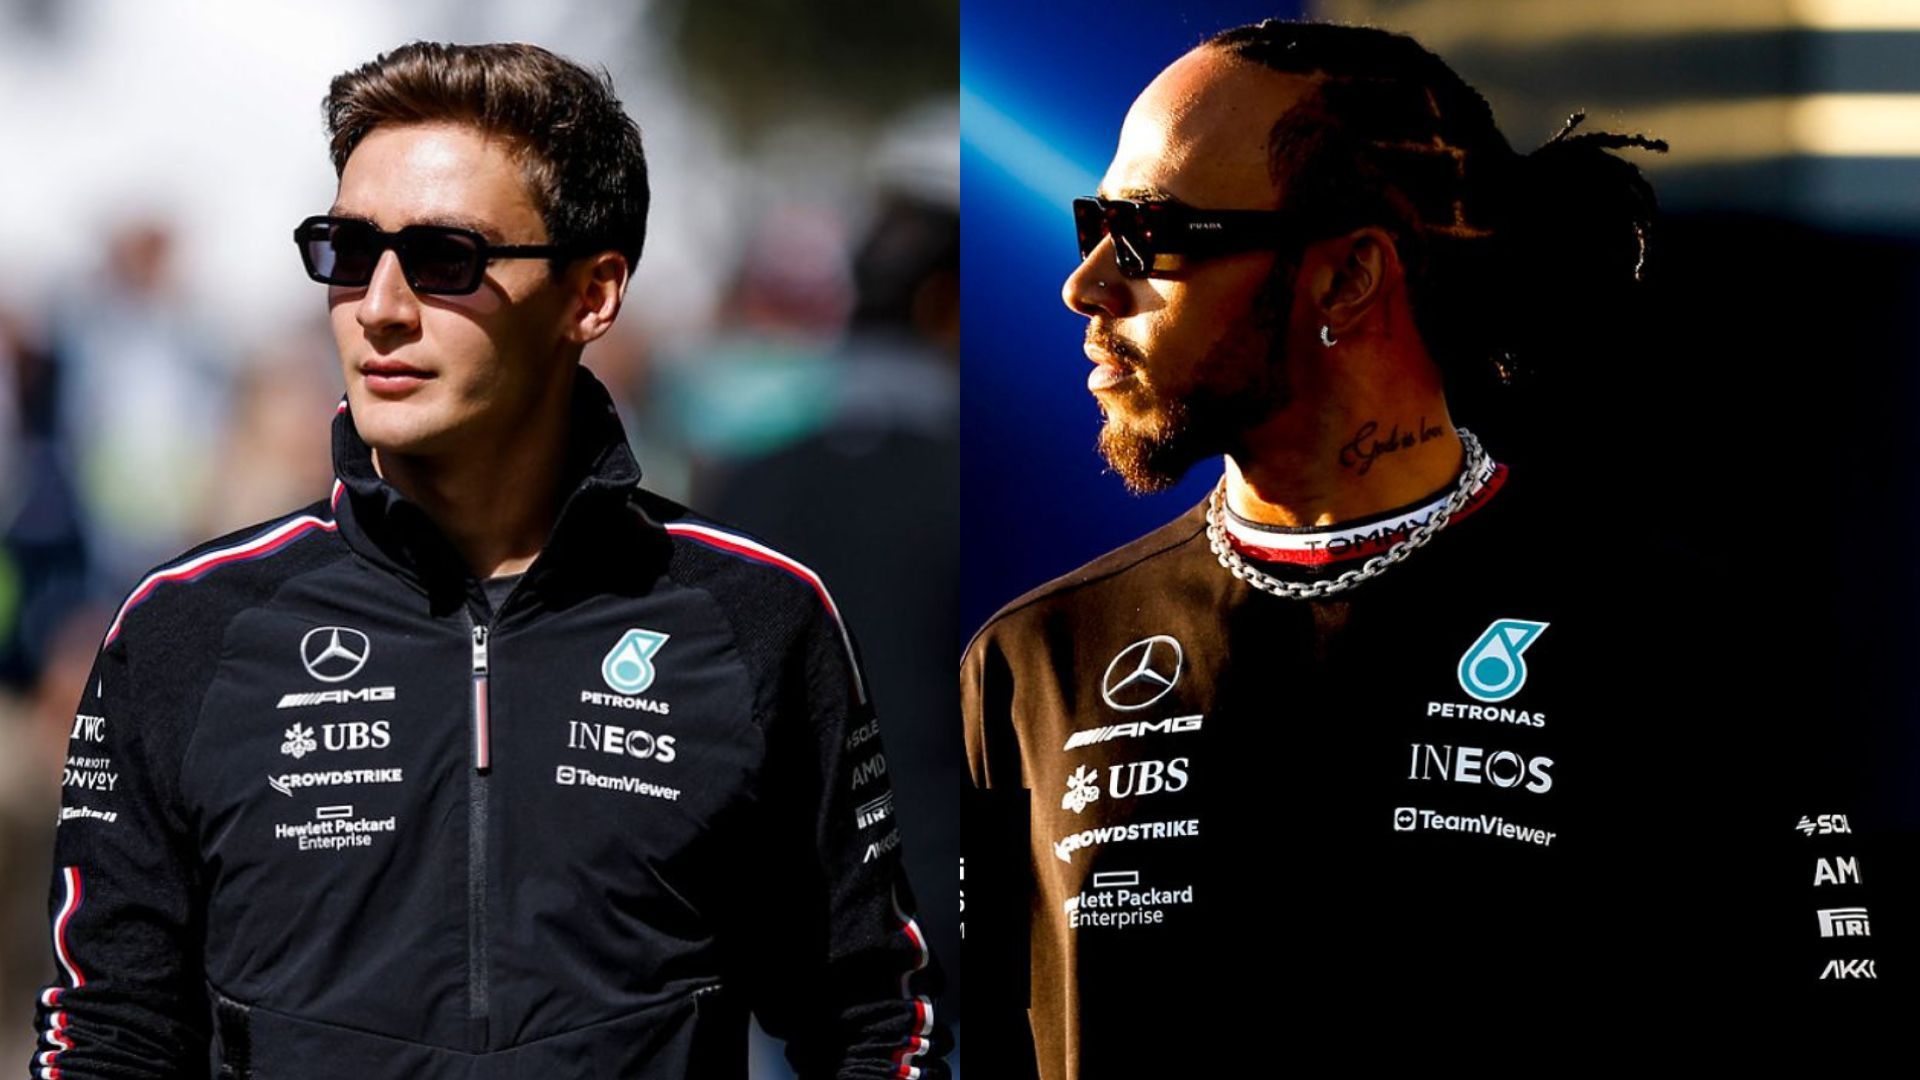 Nat sted Kan ikke lide Vind Tommy Hilfiger And Mercedes-AMG Petronas F1 Have A New Collection